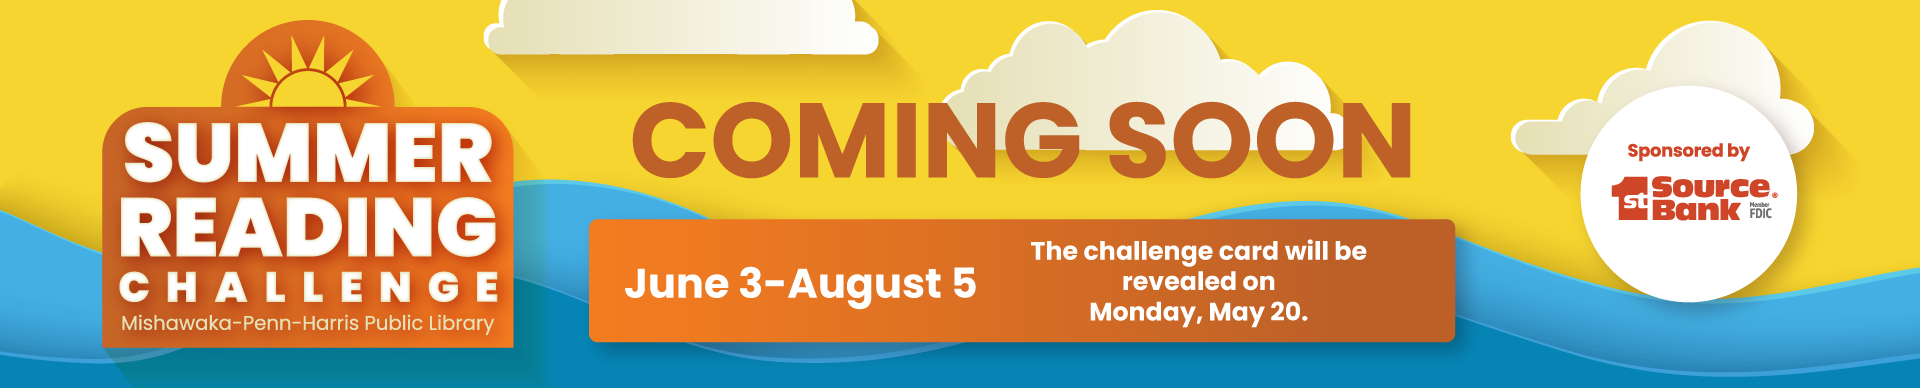 1st Source Bank logo. ‘Summer Reading Challenge Mishawaka-Penn-Harris Public Library. Coming Soon June 3-August 5. The challenge card will be revealed Monday, May 20.’ 